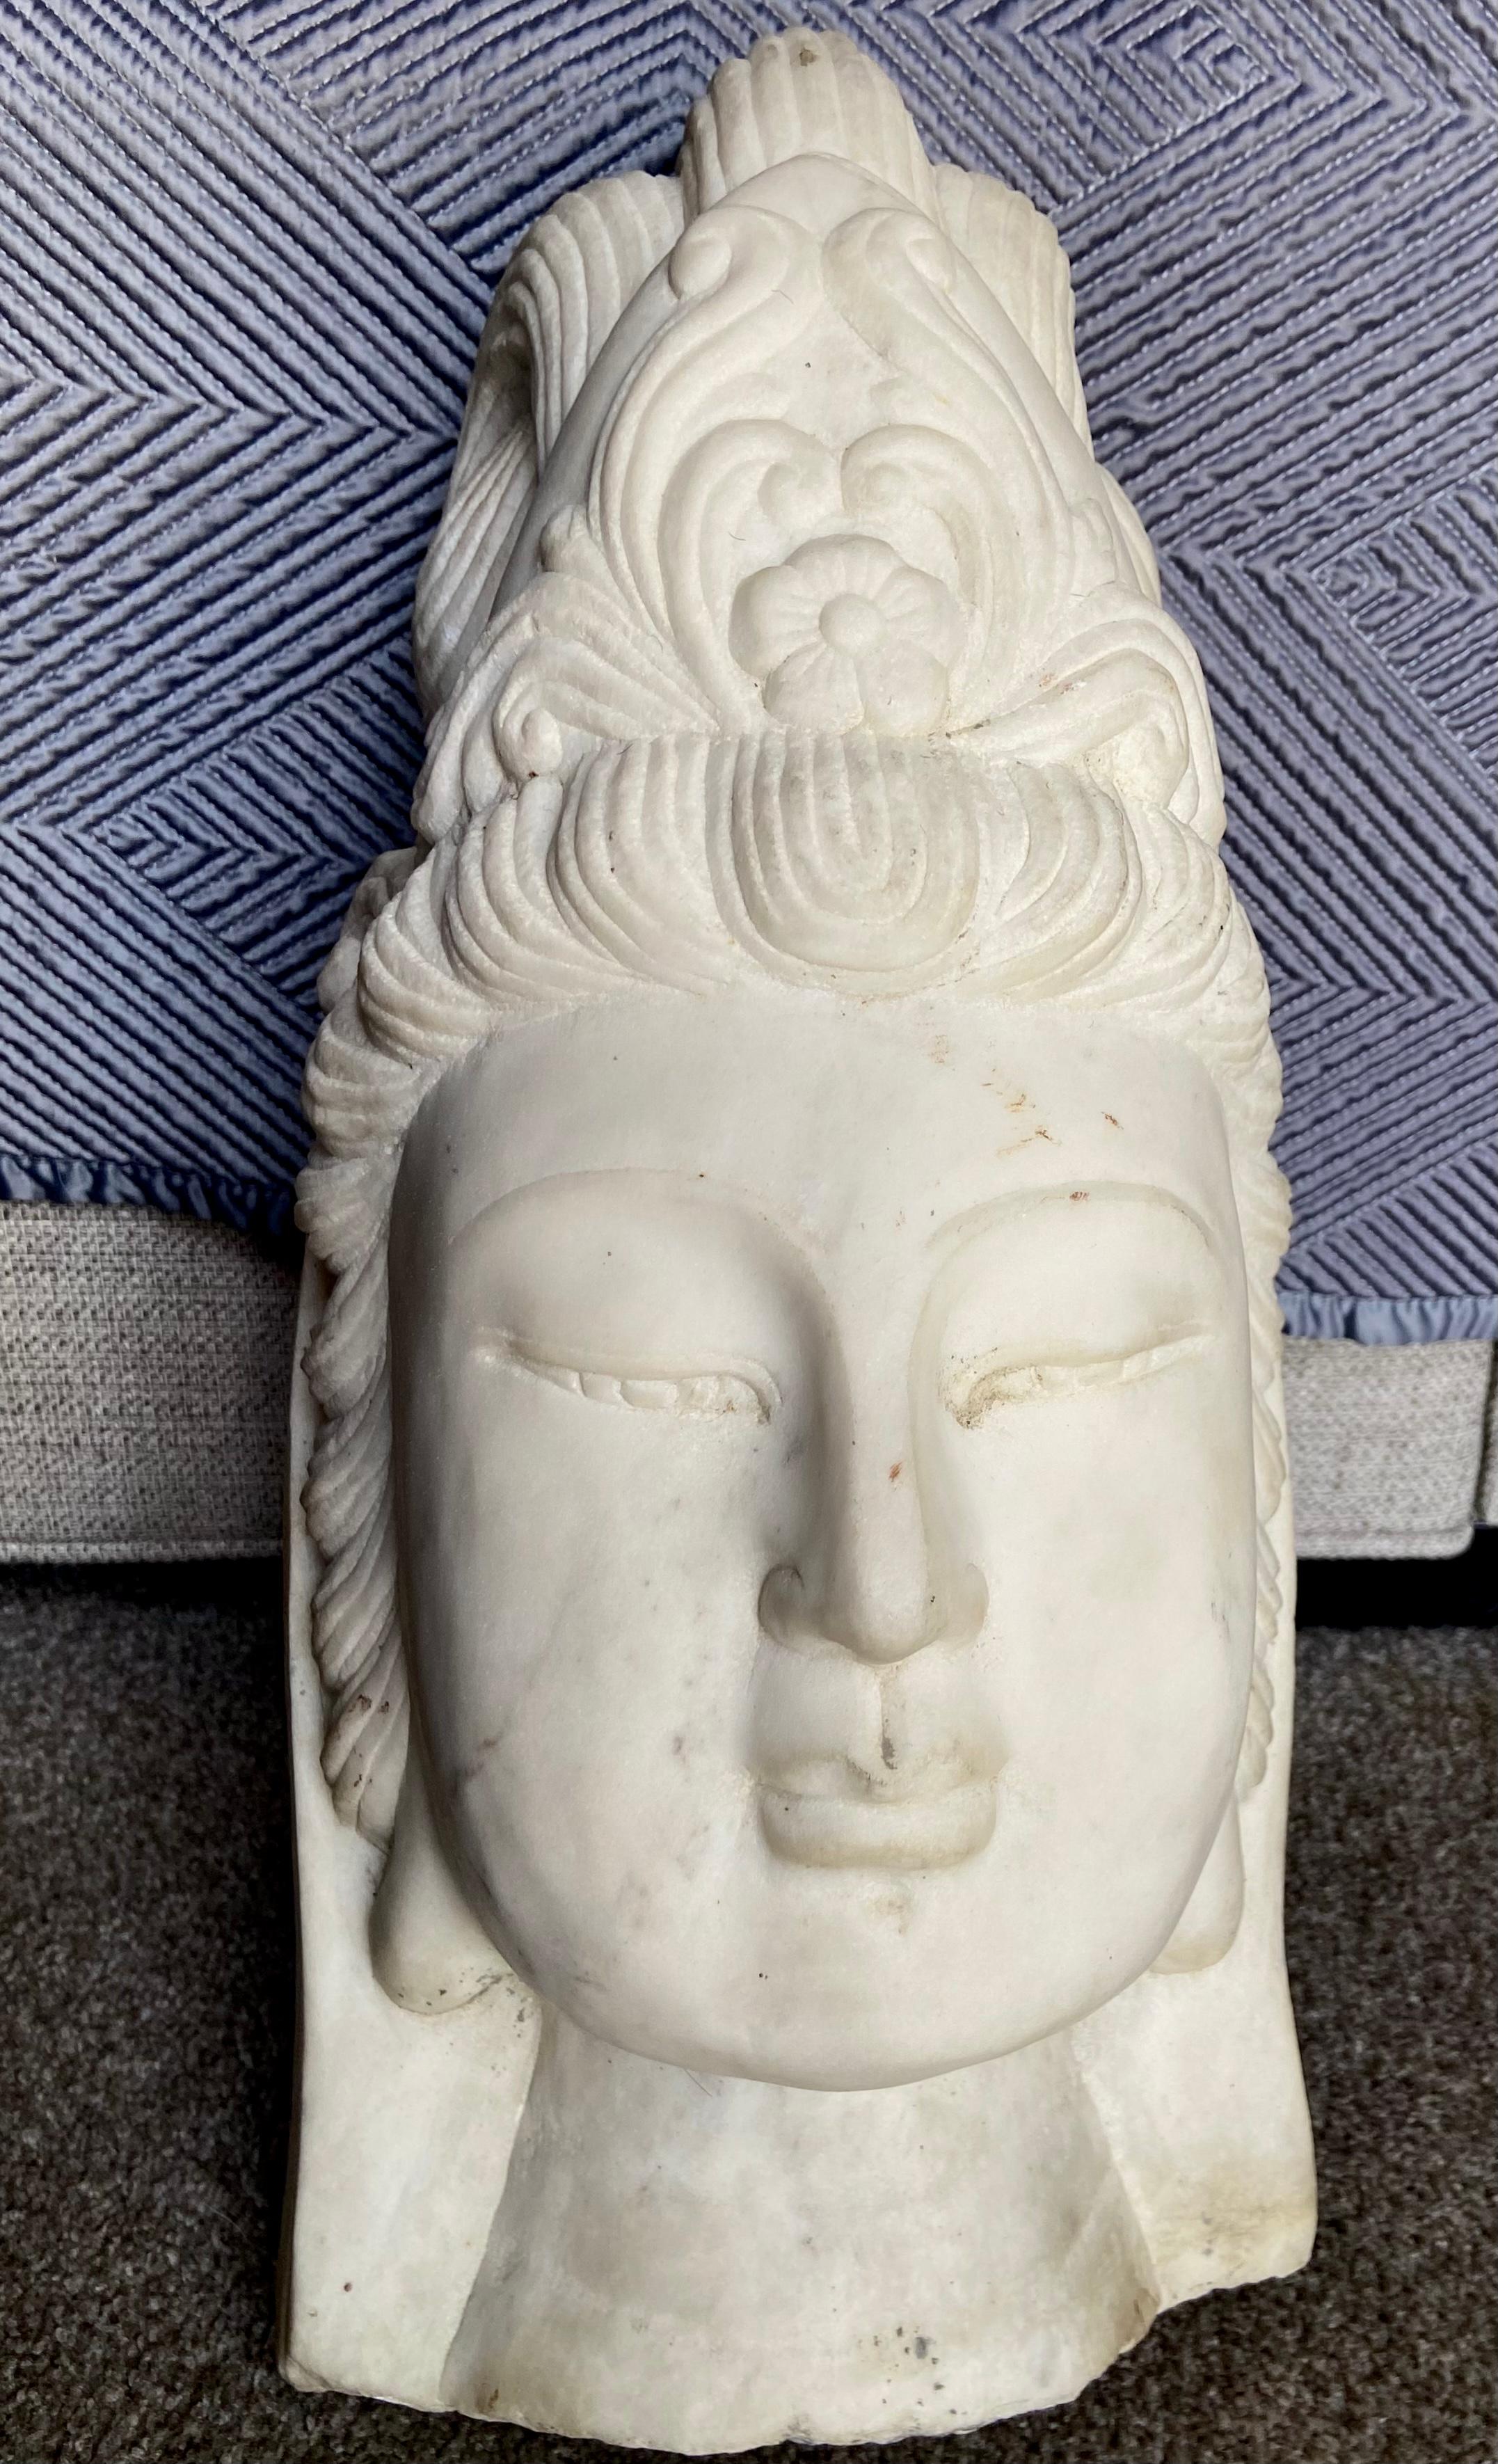 Beautifully executed hand carved marble buddha head fragment of Quan Yin. The youthful face is peaceful and serine framed by an intricately carved headdress. A striking art object with fine quality workmanship. This is an older piece most likely